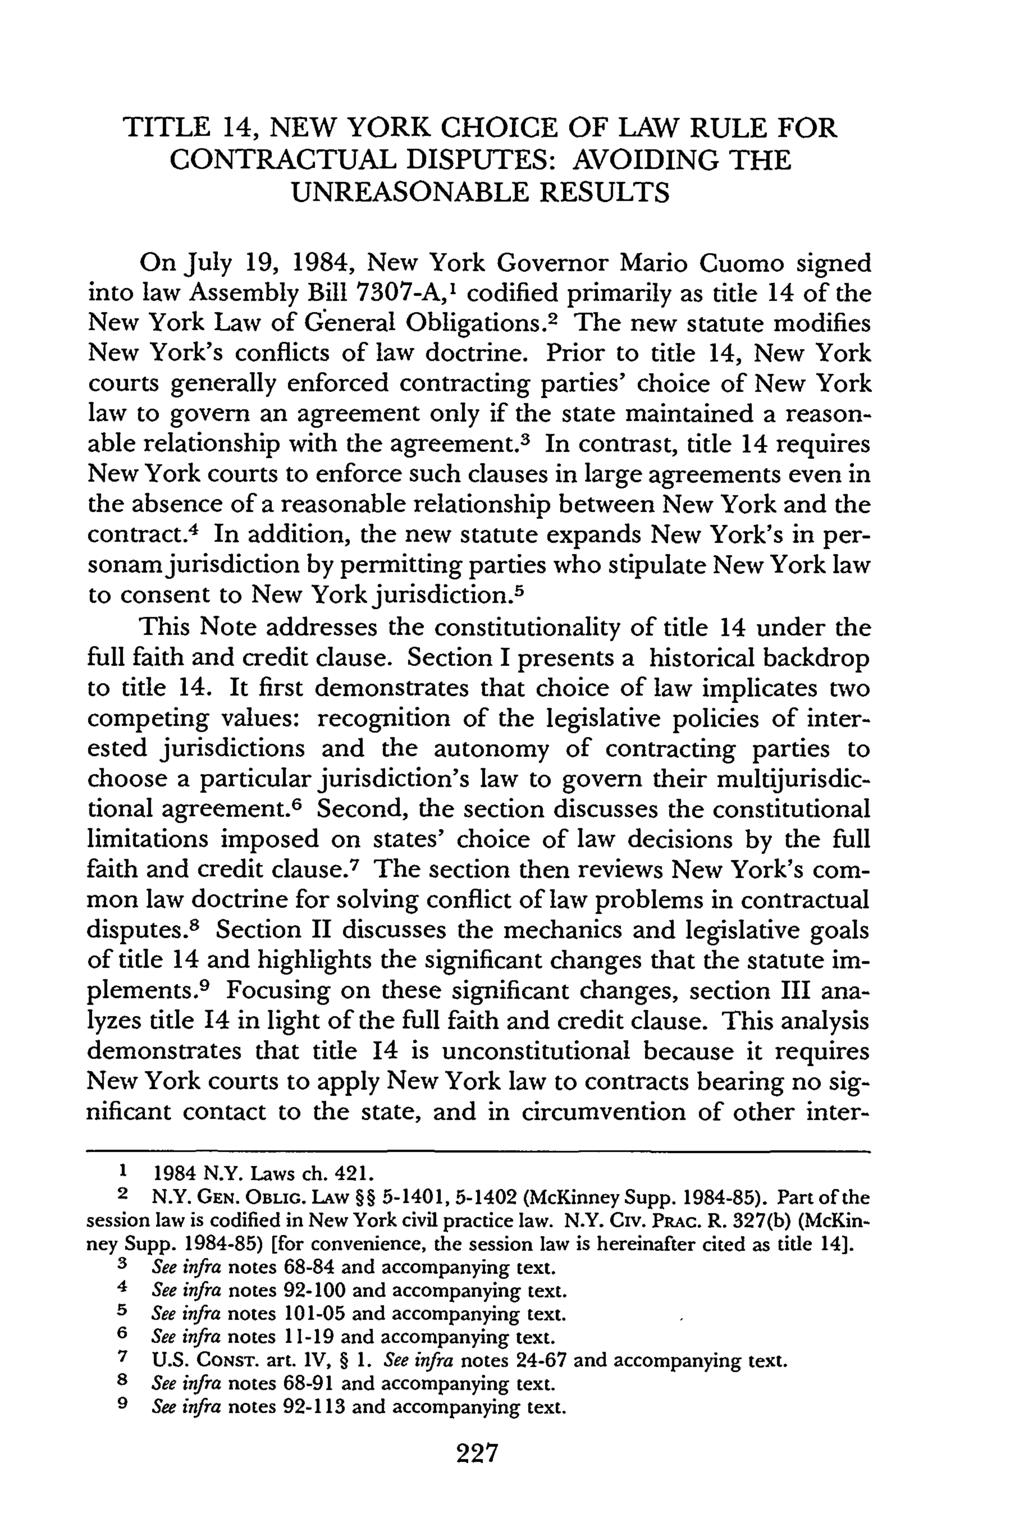 TITLE 14, NEW YORK CHOICE OF LAW RULE FOR CONTRACTUAL DISPUTES: AVOIDING THE UNREASONABLE RESULTS On July 19, 1984, New York Governor Mario Cuomo signed into law Assembly Bill 7307-A,' codified